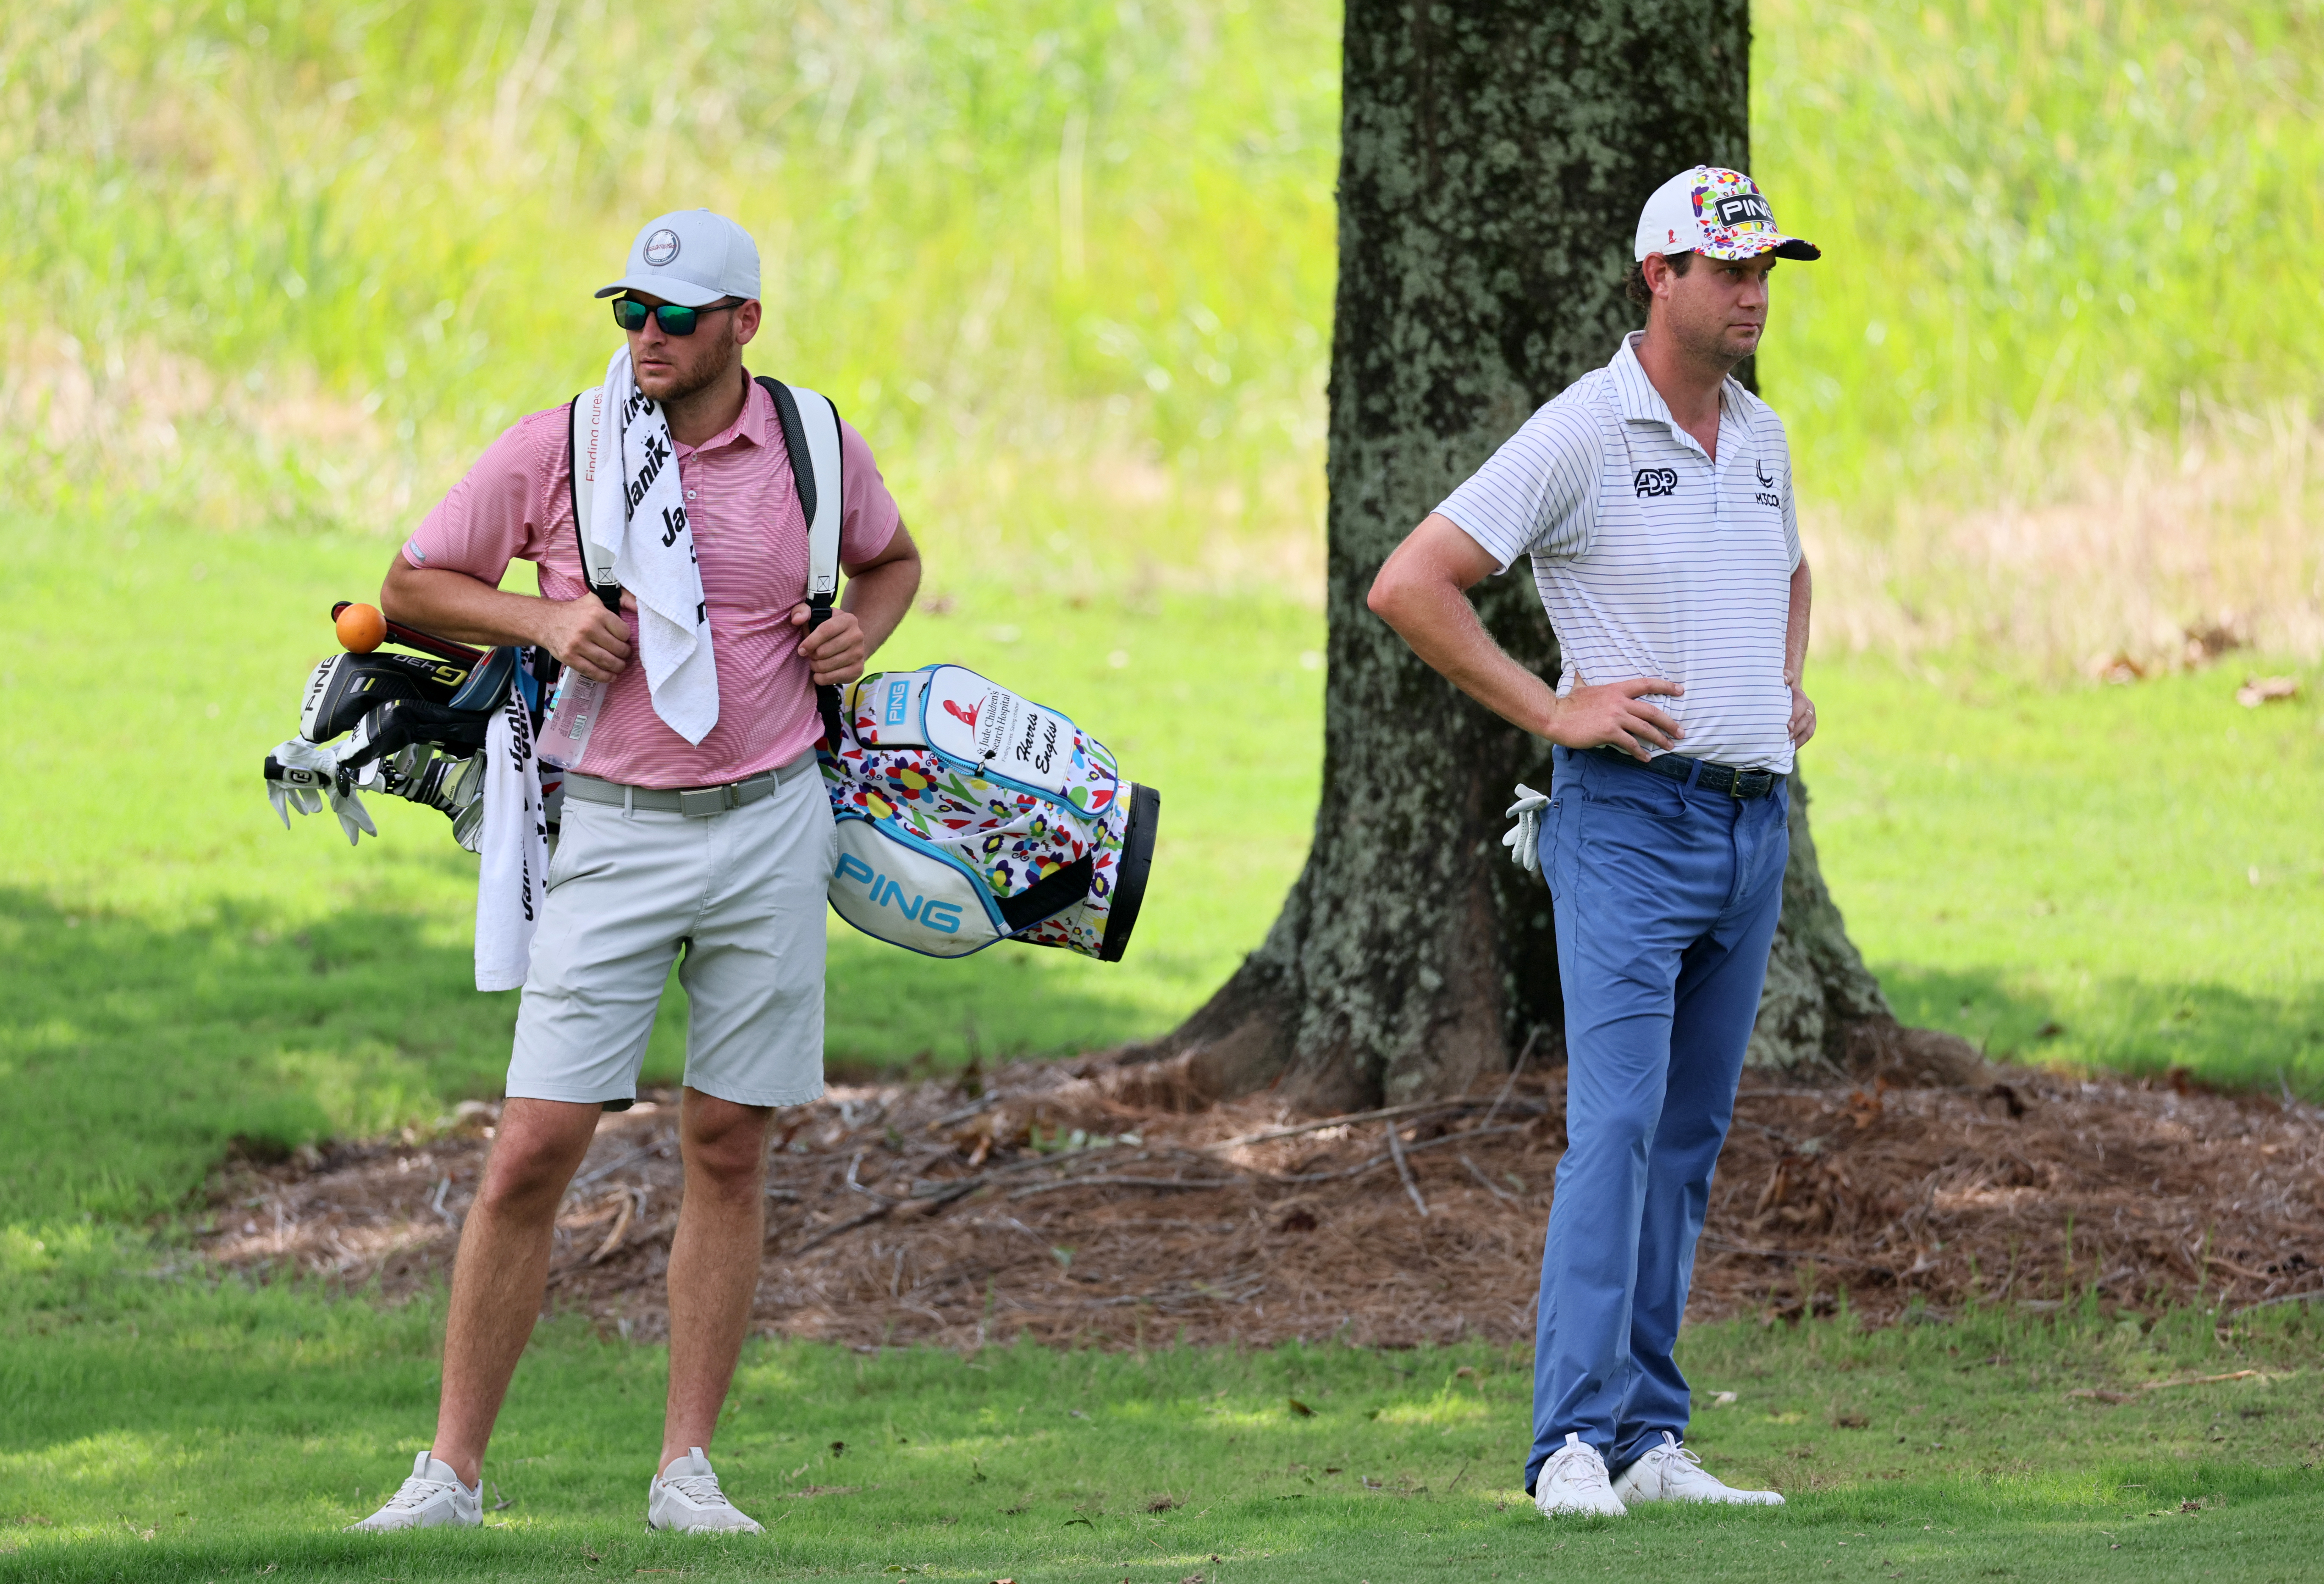 Tour pro's caddie suffers heat distress in steamy Memphis and fan comes to  rescue to tote bag | Golf News and Tour Information | GolfDigest.com